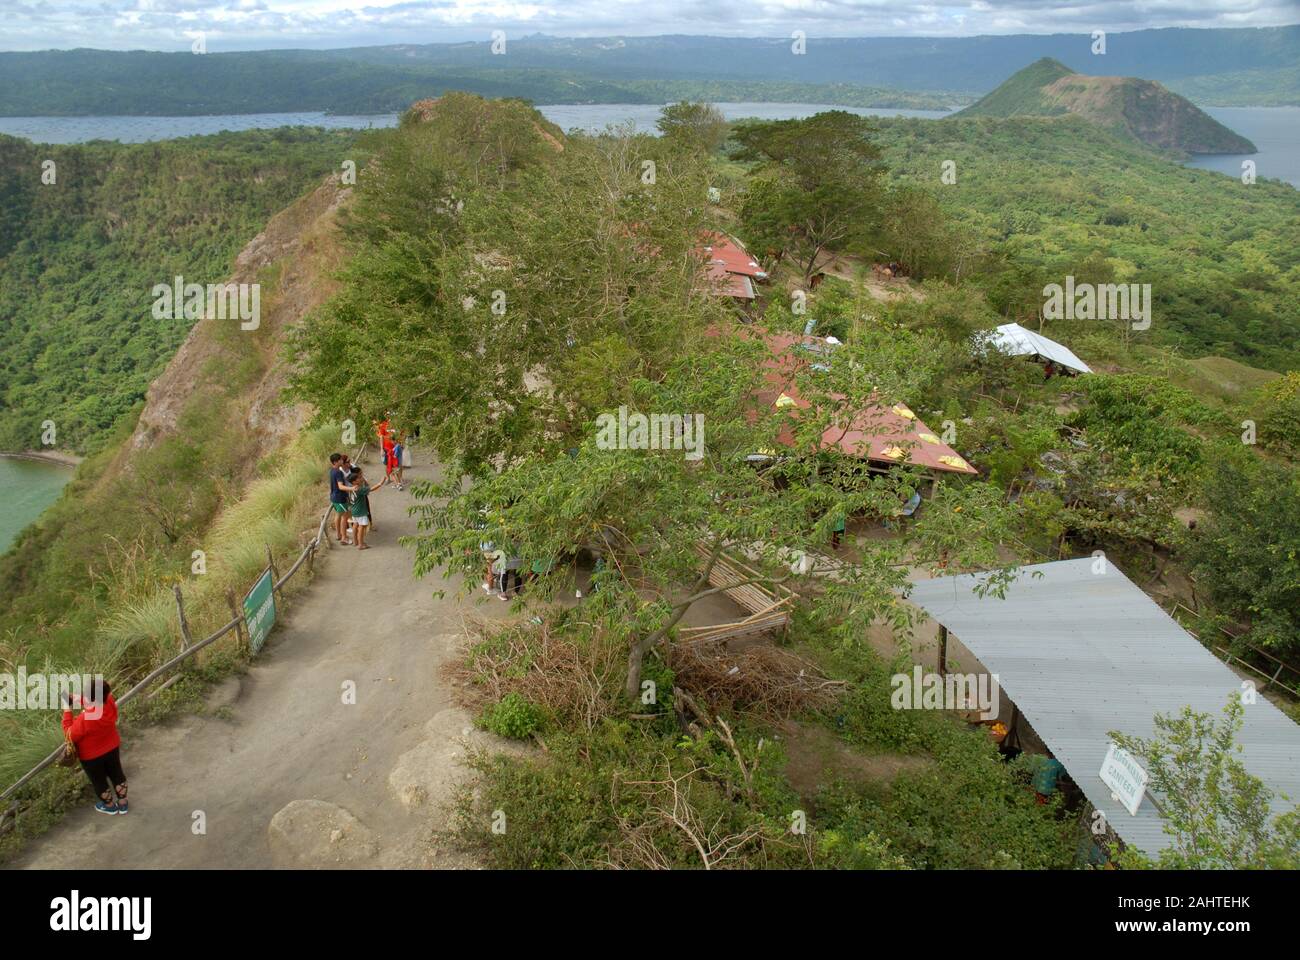 Top of Taal Volcano, Talisay, Batangas, Luzon, Philippines. Stock Photo